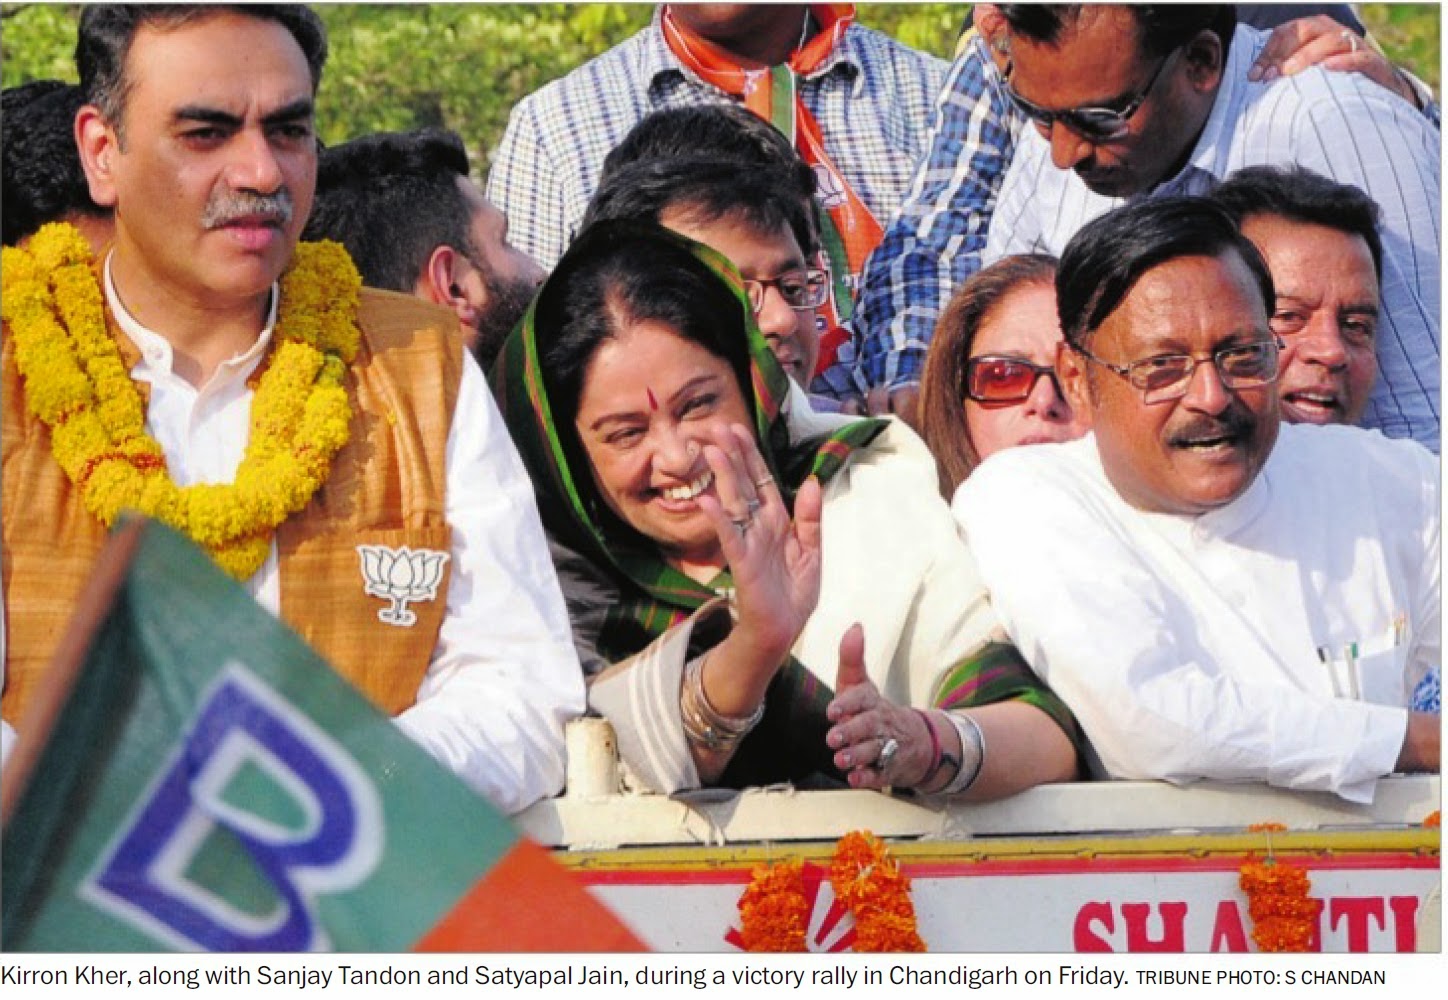 Kirron Kher along with Satya pal Jain, during a victory rally in Chandigarh on Friday